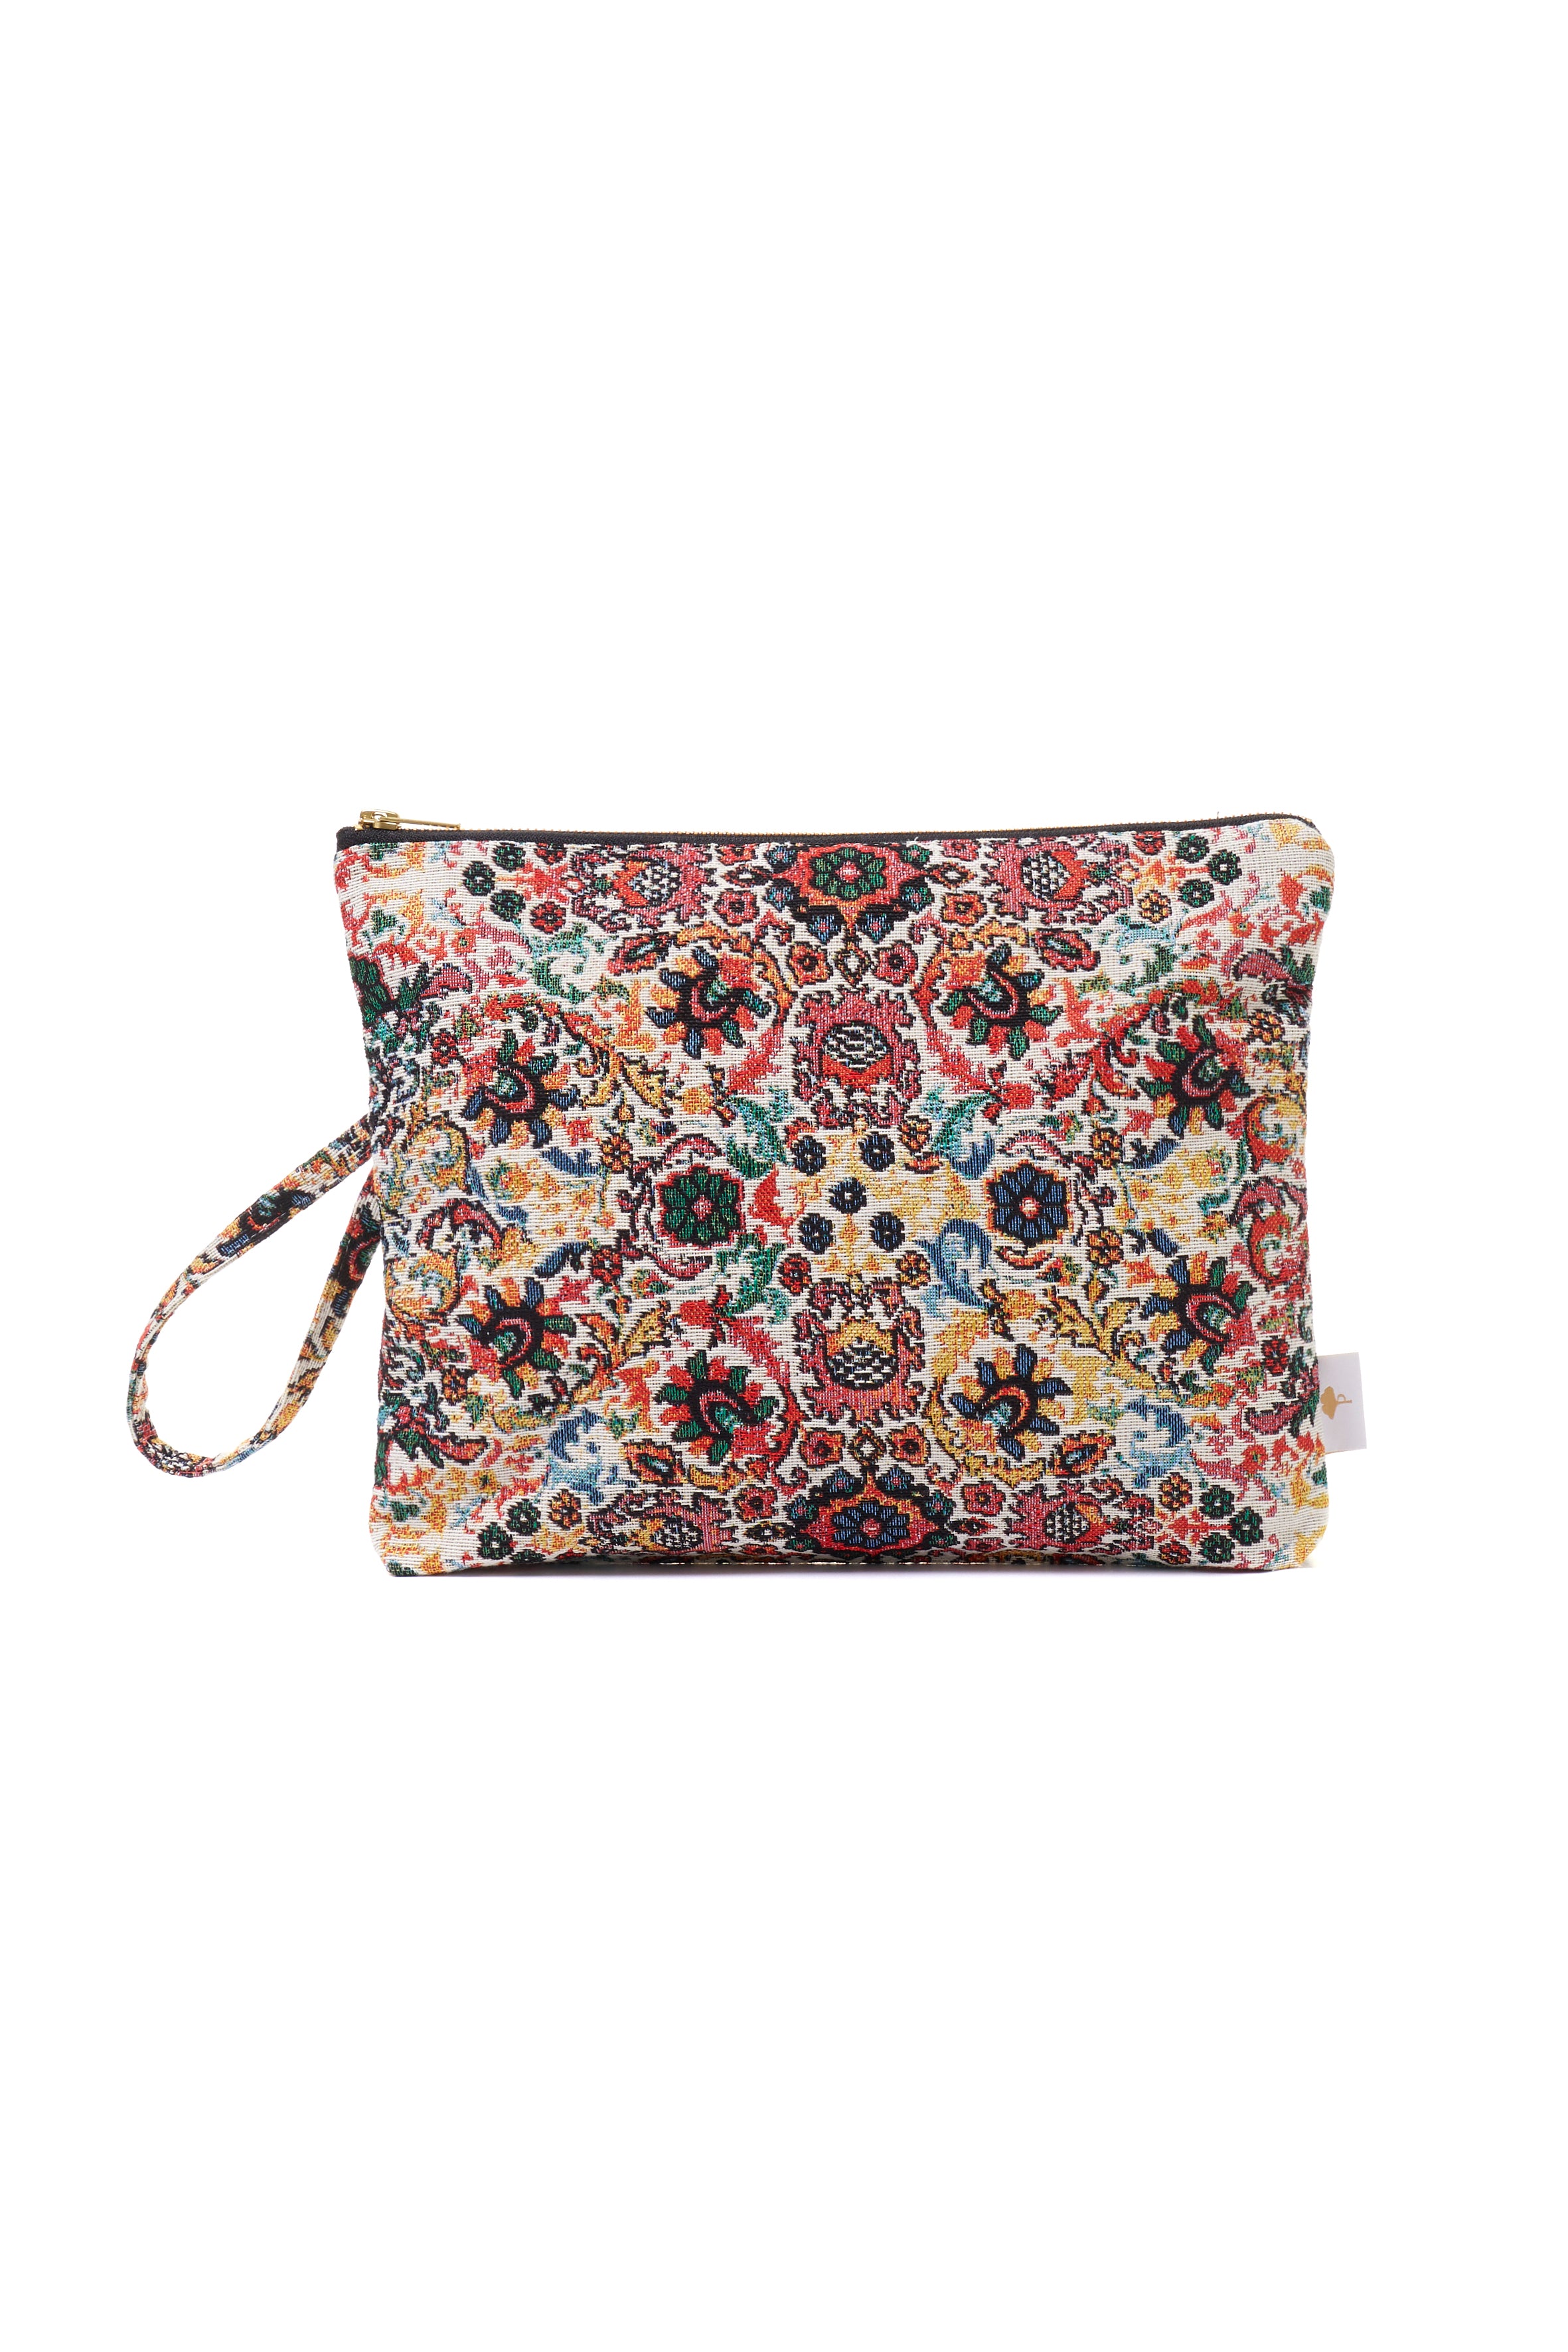 TRAVEL POUCH LARGE - FLORAL